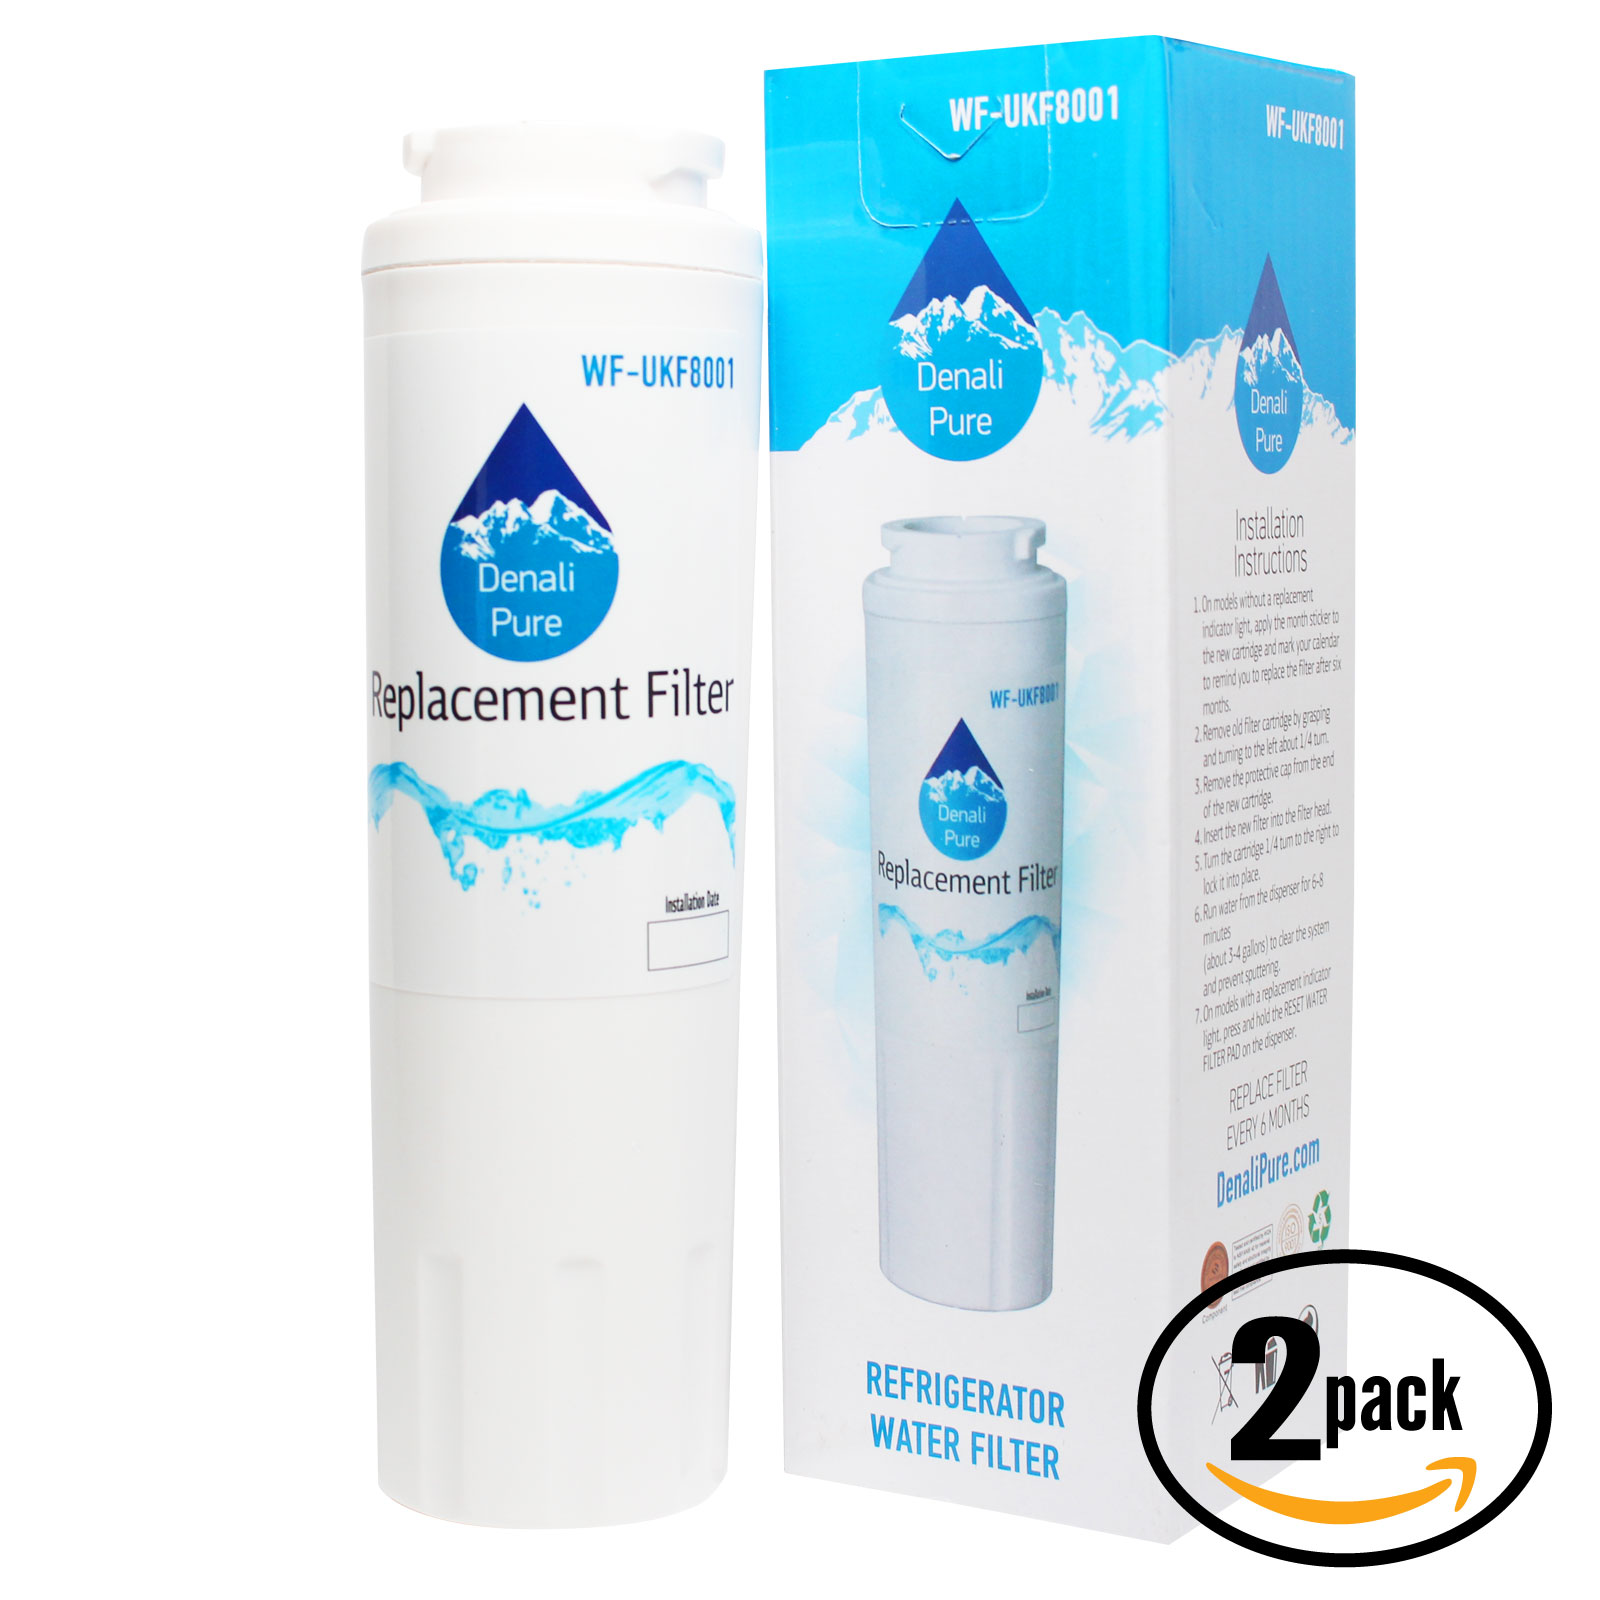 2-Pack Replacement for KitchenAid KFXS25RYWH1 Refrigerator Water Filter - Compatible with KitchenAid 4396395 Fridge Water Filter Cartridge - Denali Pure Brand - image 1 of 4